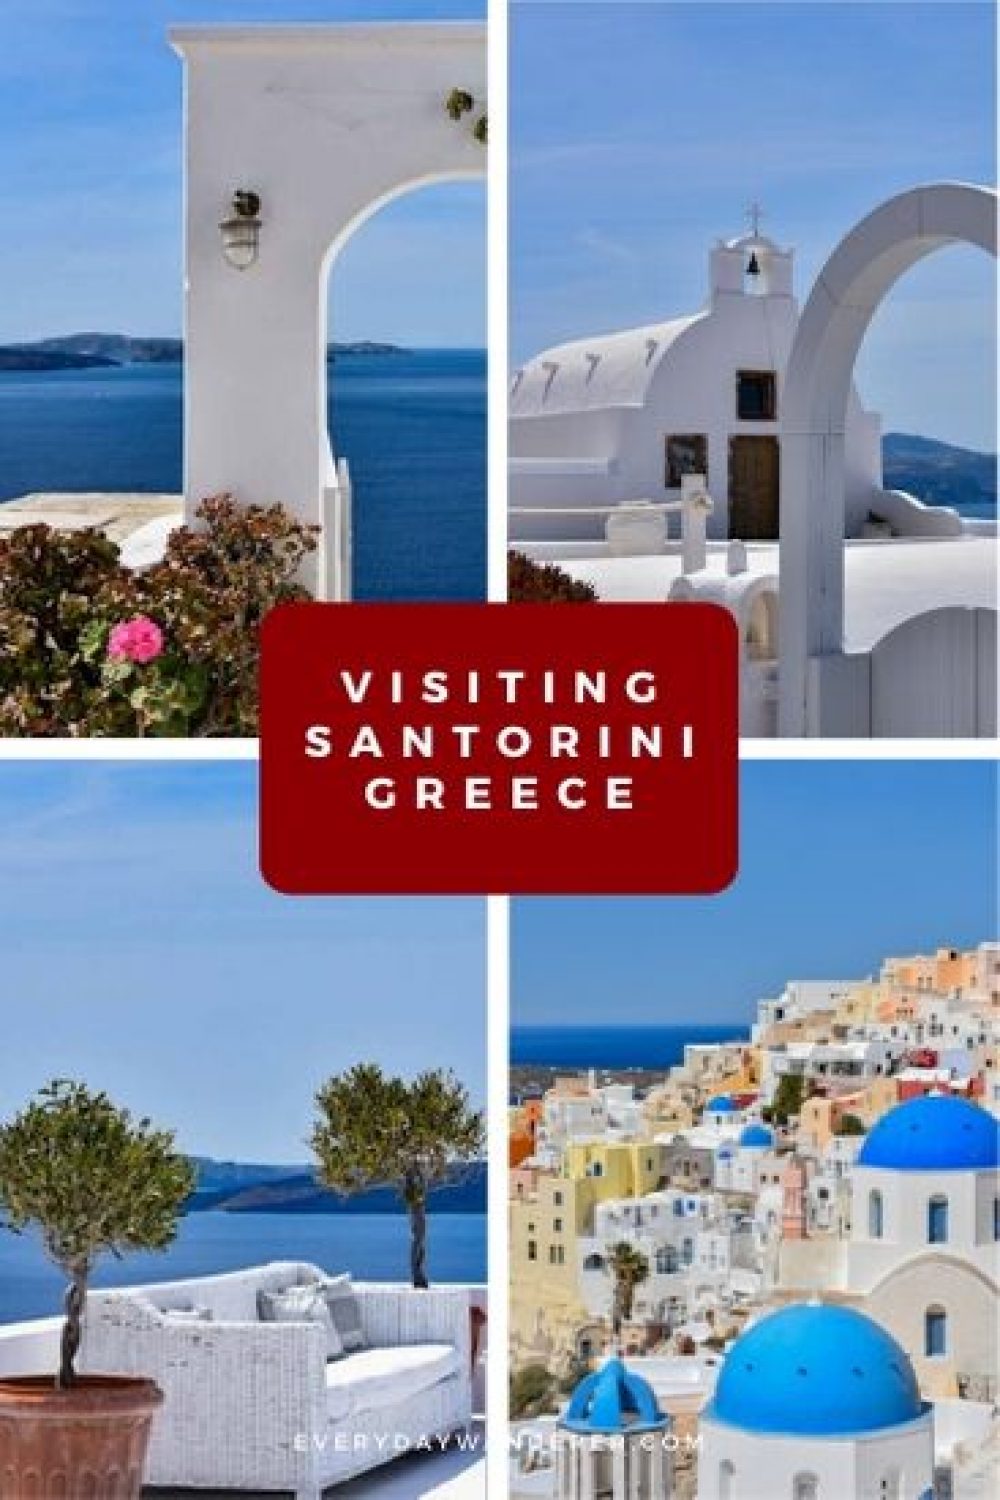 Things to do when you visit Santorini Greece. Santorini places to visit include the Anastasi Church. Best sunset spots in Santorini. Where to eat in Santorini. #santorini #greece #europe #travel